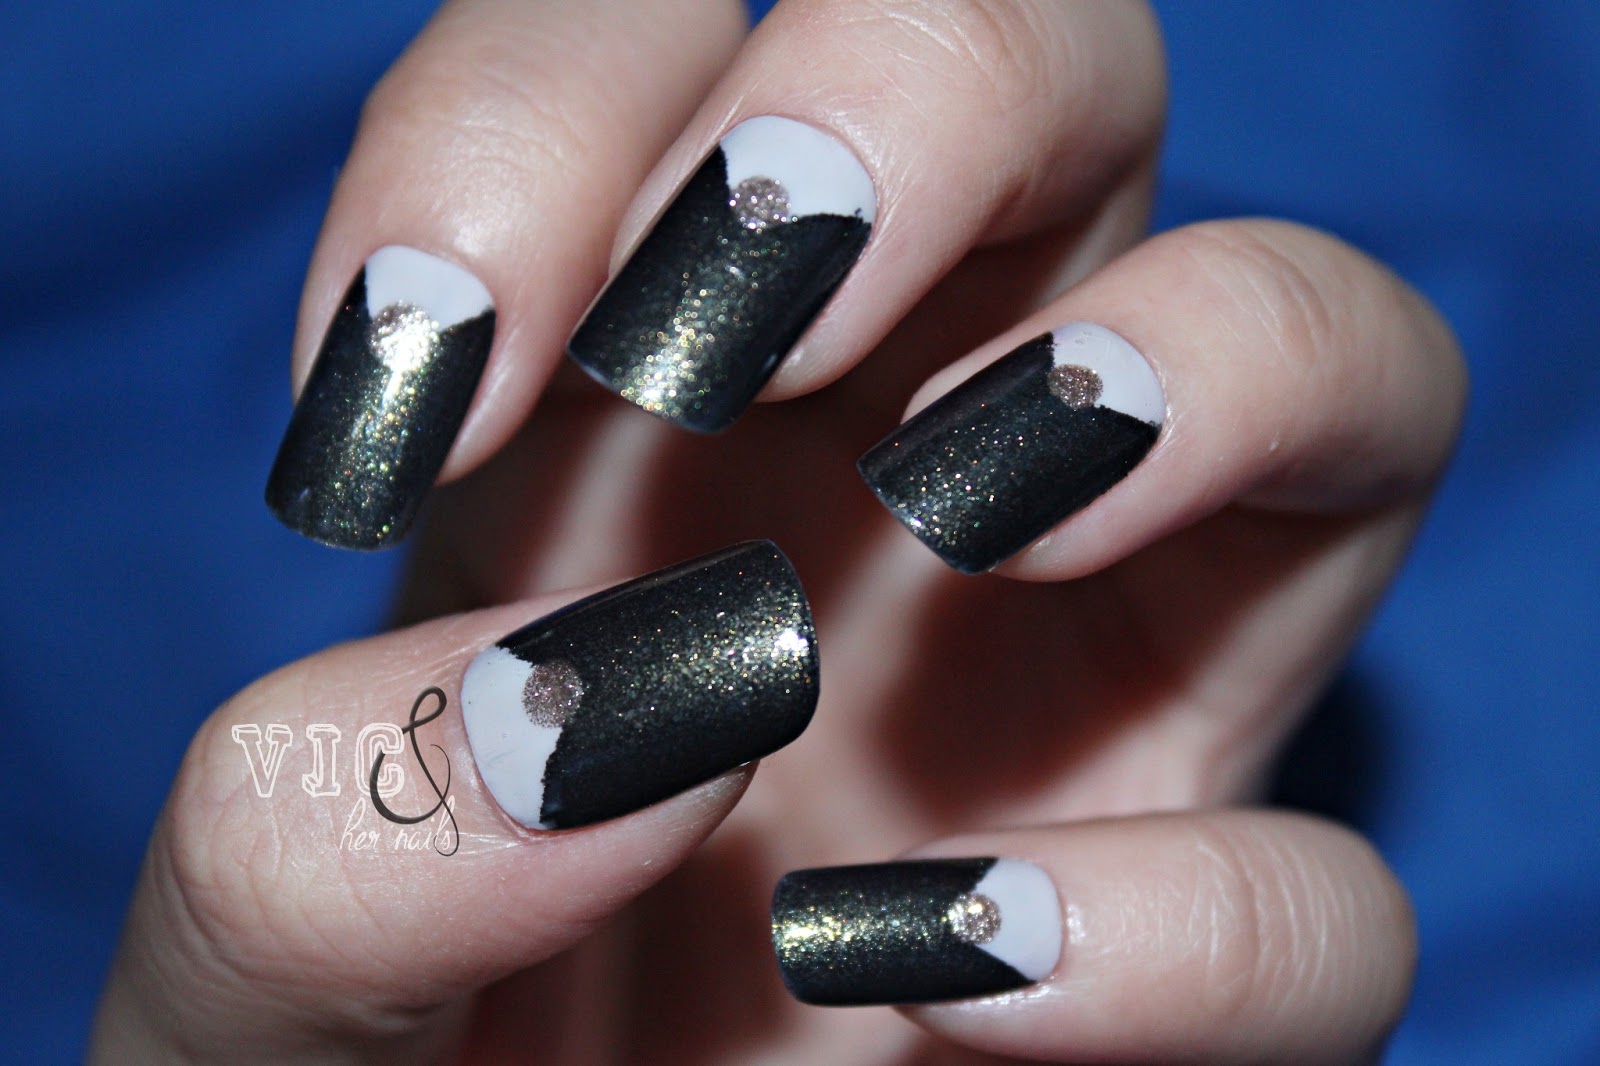 Vic and Her Nails: OMD Challenge Day 31 - Recreate Your Favourite